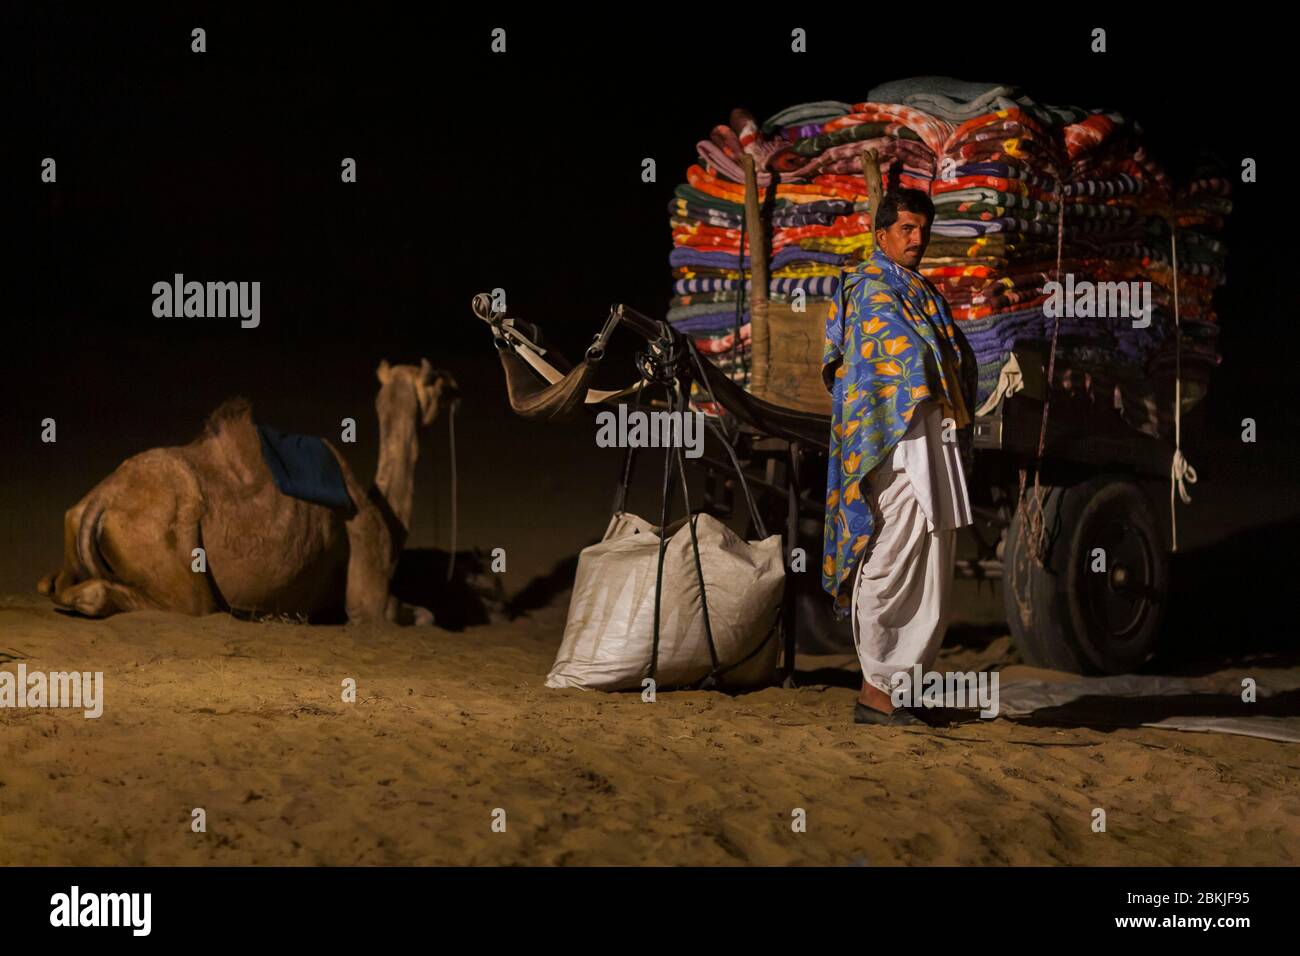 India, Rajasthan, Bikaner, Camel Festival, carpet seller getting ready to spend the night in the desert Stock Photo